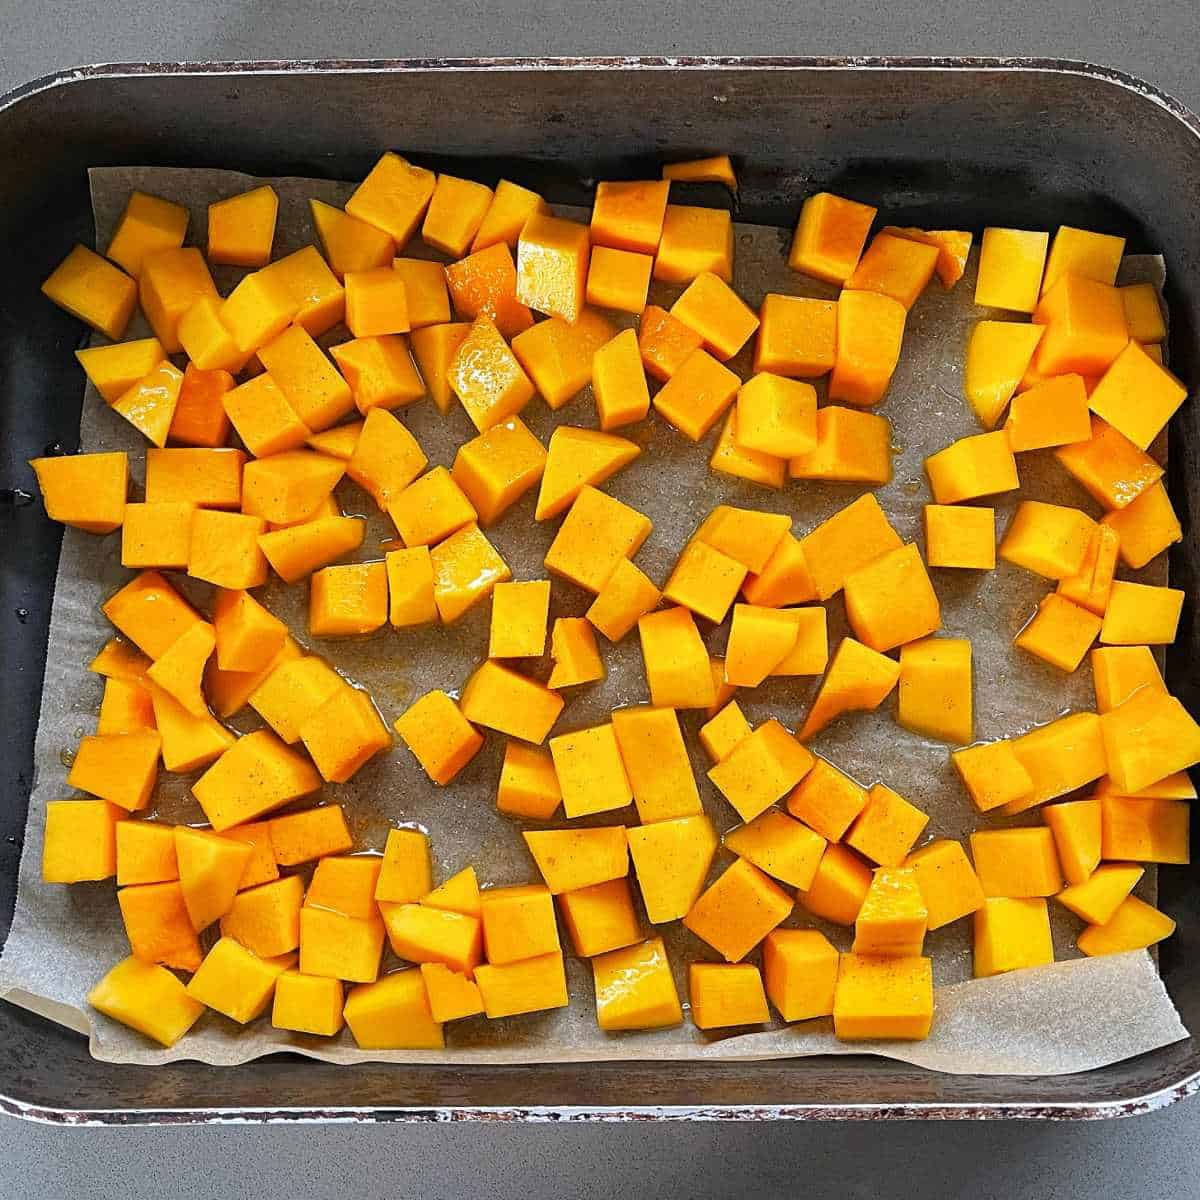 Cubed pumpkin pieces covered in mayple syrup in a lined roasting tray